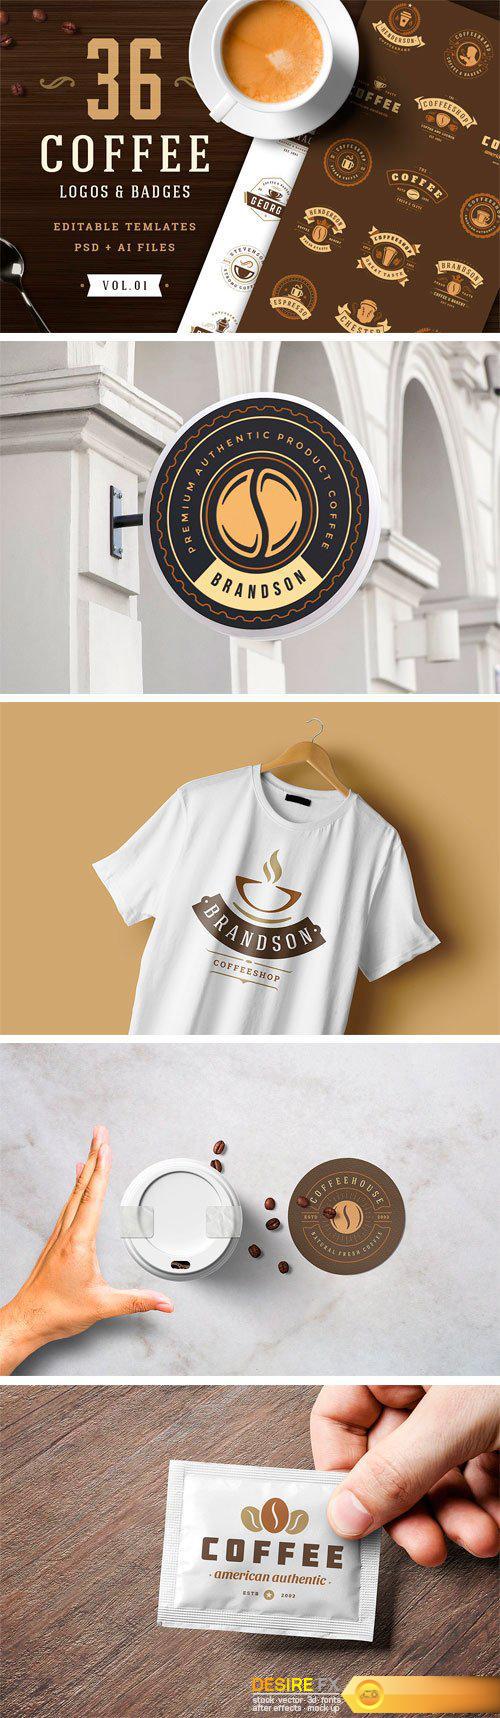 CM - 36 Coffee Logos and Badges 2510765